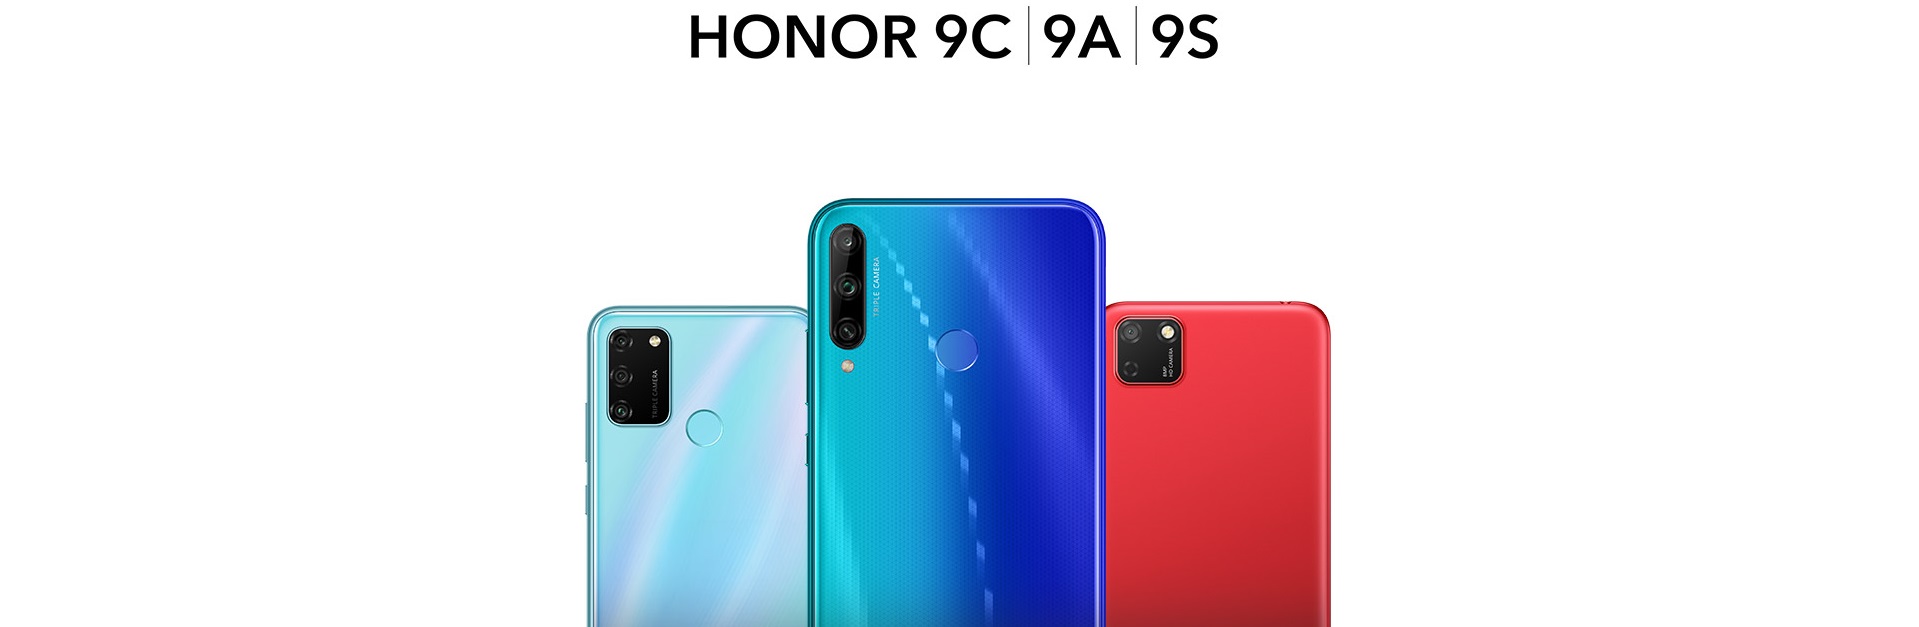 Honor 9C 9A 9S smartphone